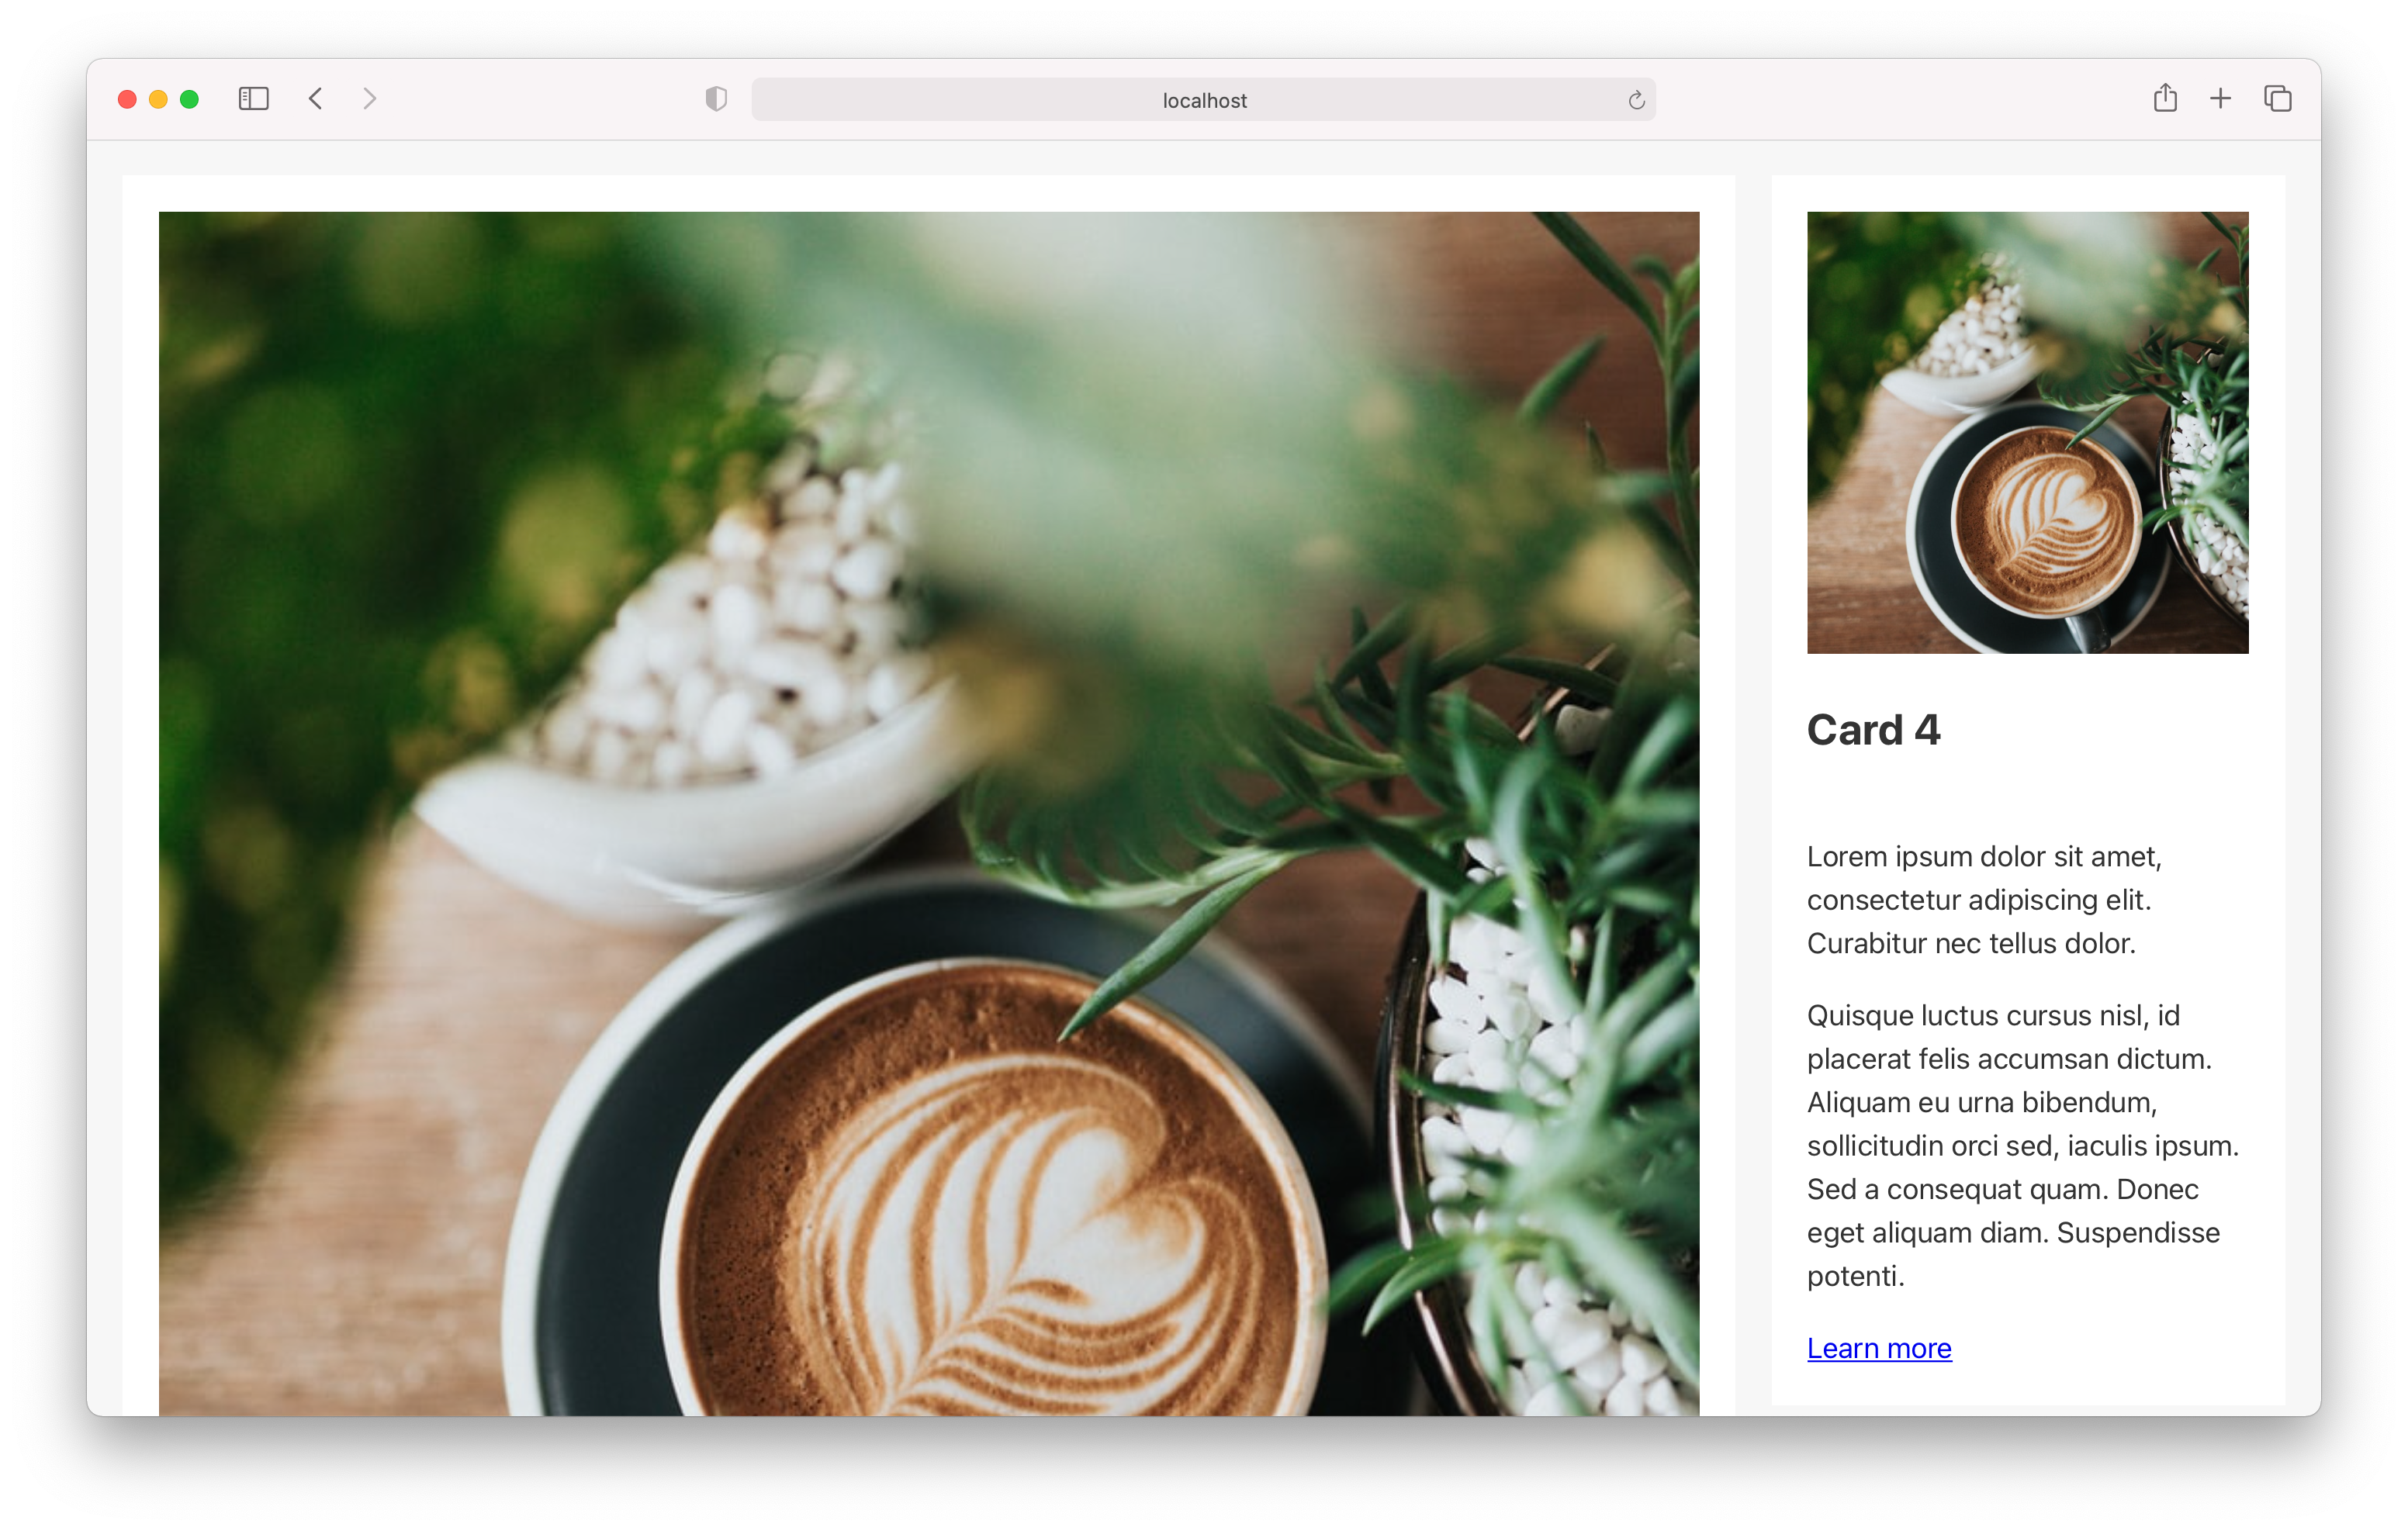 Browser with large and small images of a coffee cup and plants